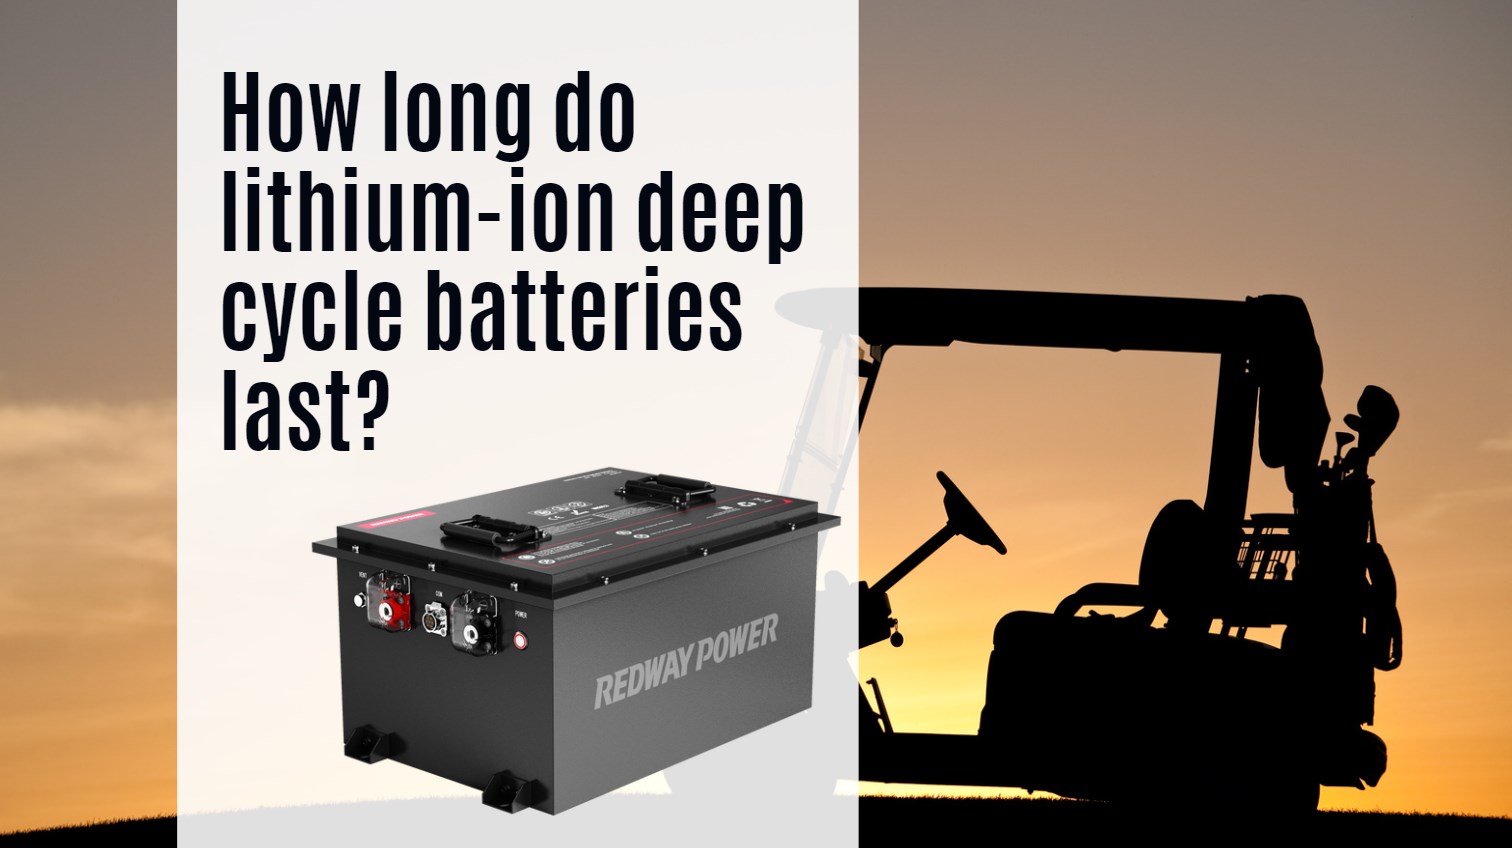 How long do lithium-ion deep cycle batteries last?